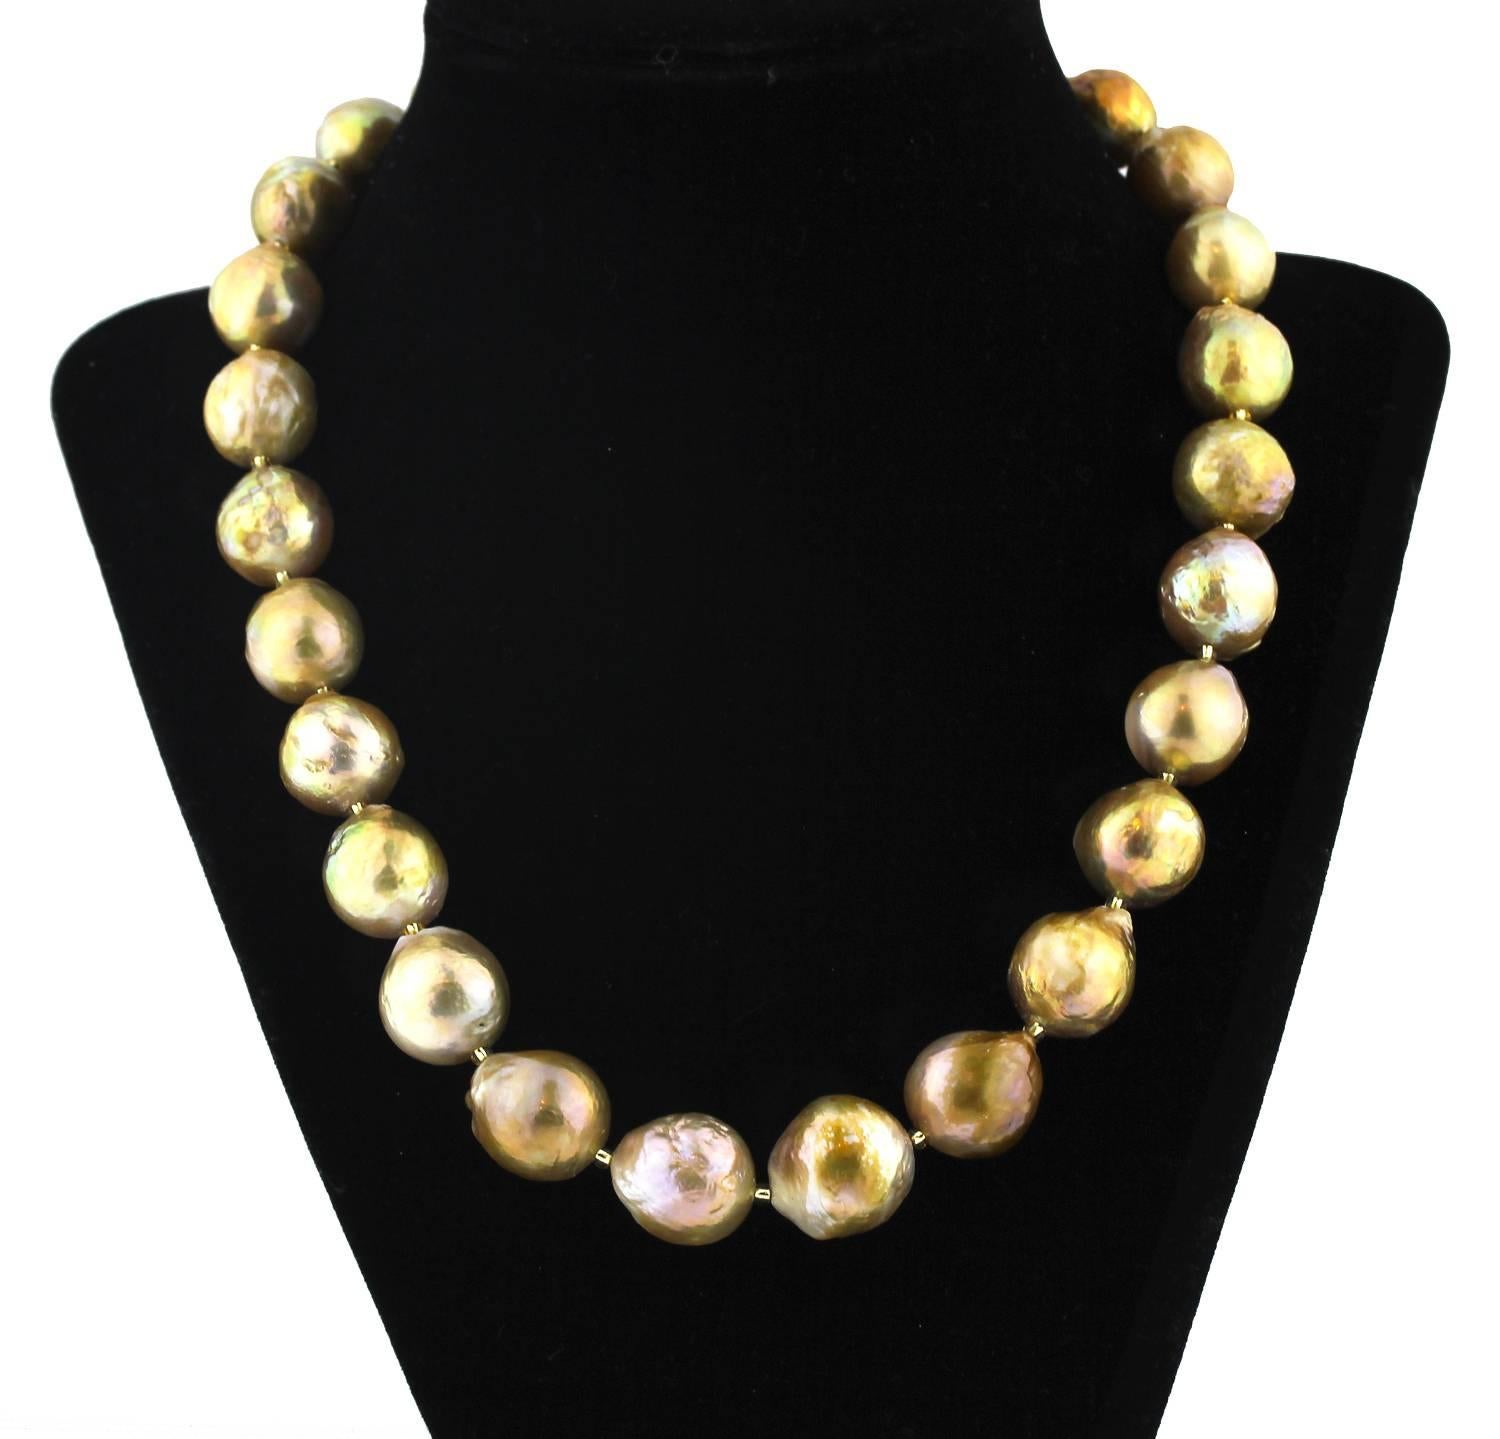 The natural unique and rare golden nacre from the Pearl shells is truly magnificent on these huge beauties on this handmade necklace..  Size:  graduated up to 17 mm;  Length:  18 inches;  Clasp:  gold plated. 